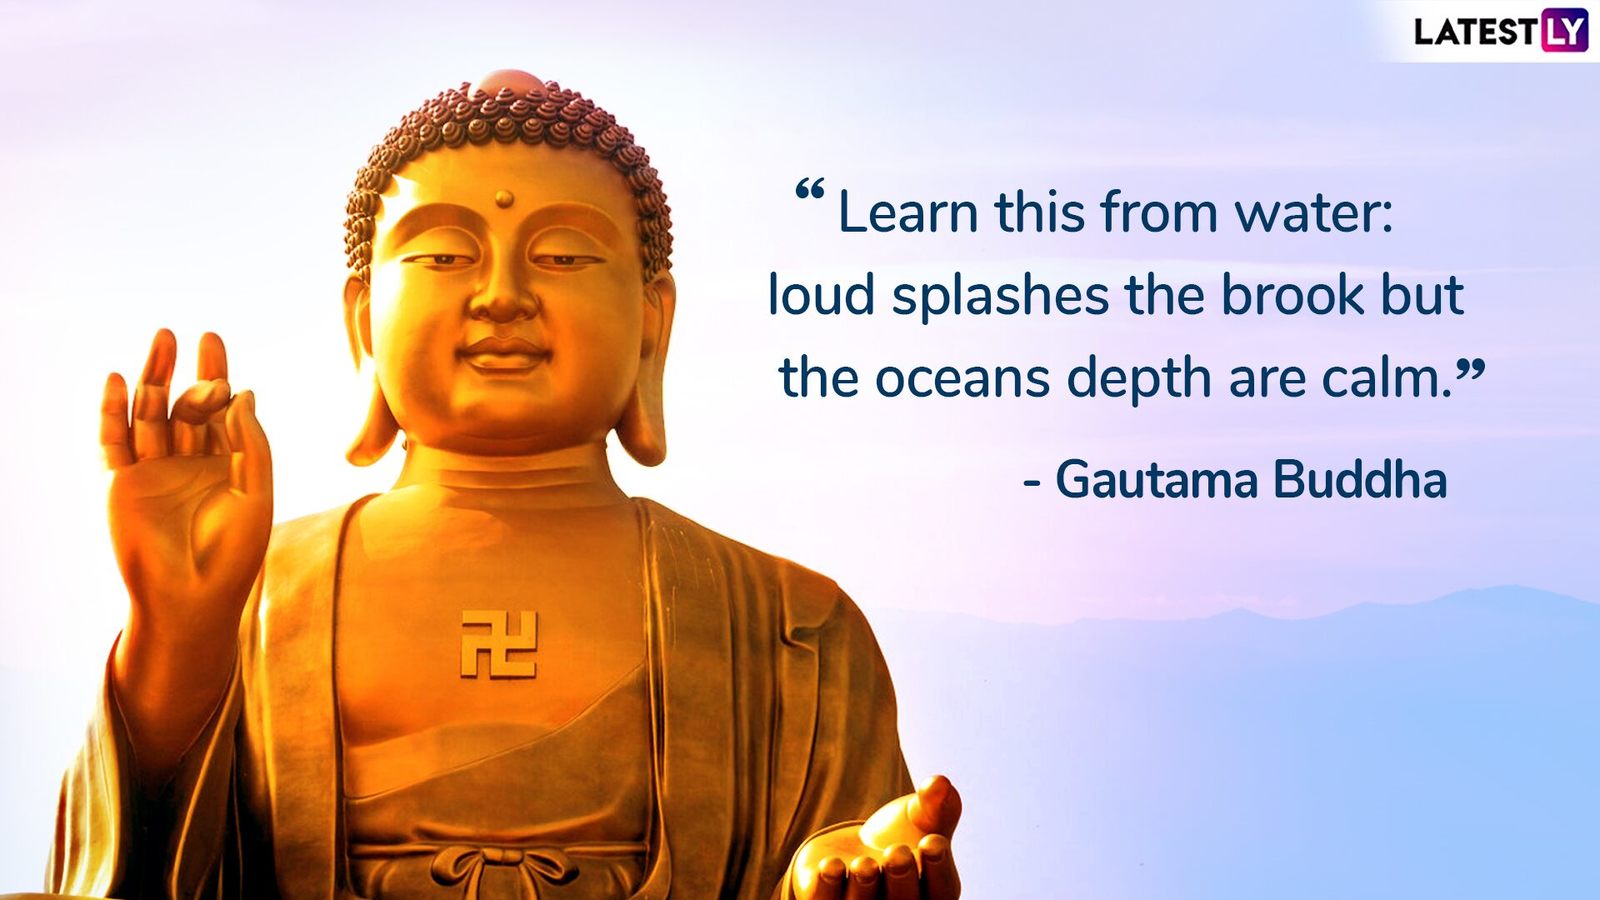 9-quotes-and-messages-share-these-inspirational-teachings-by-lord-buddha-to-celebrate-latestly-2.jpg